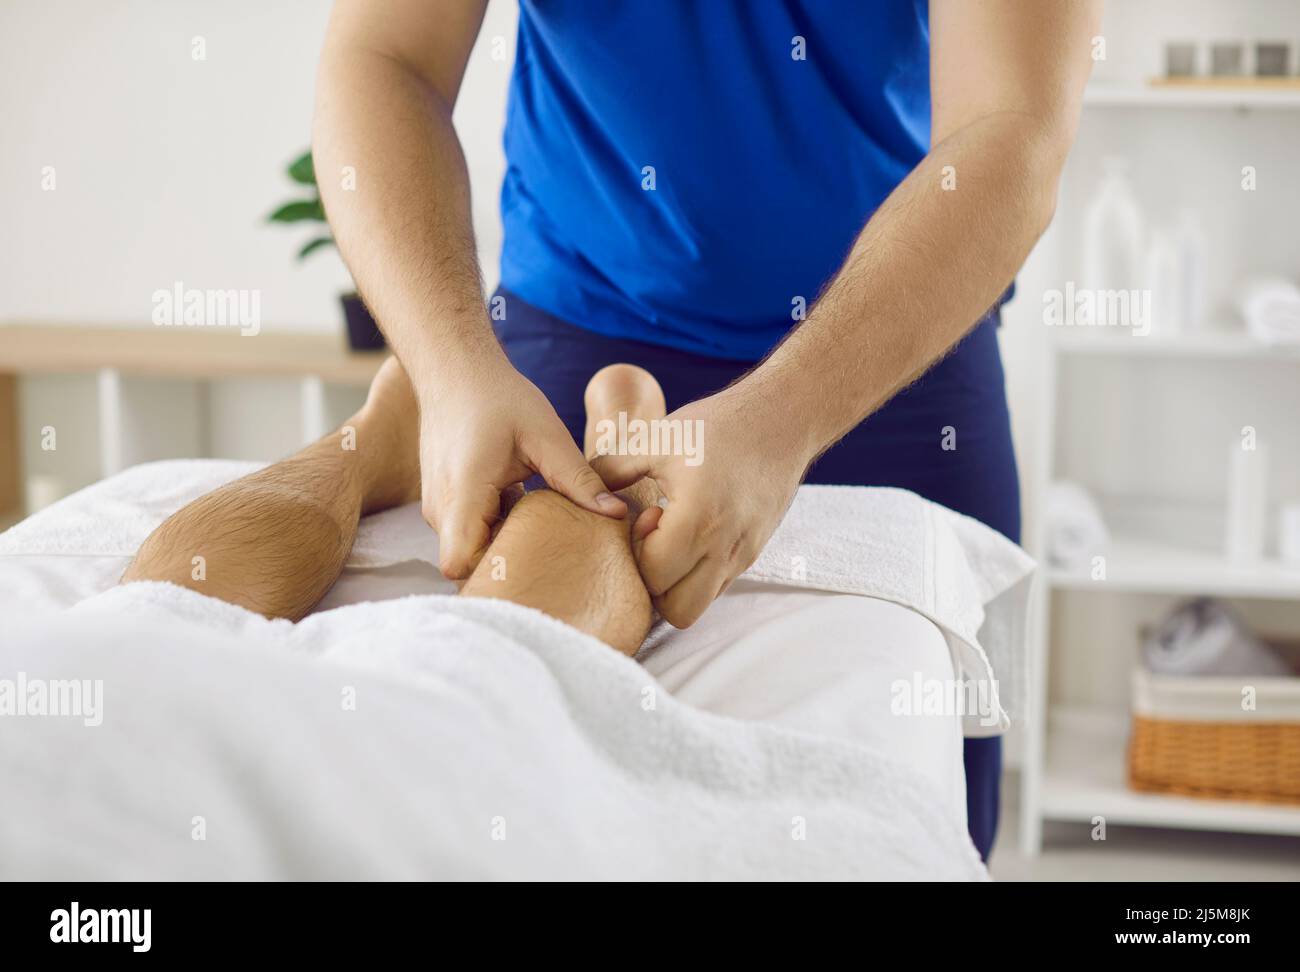 Professional physiotherapist or masseur therapist massages calf muscle of male patient. Stock Photo